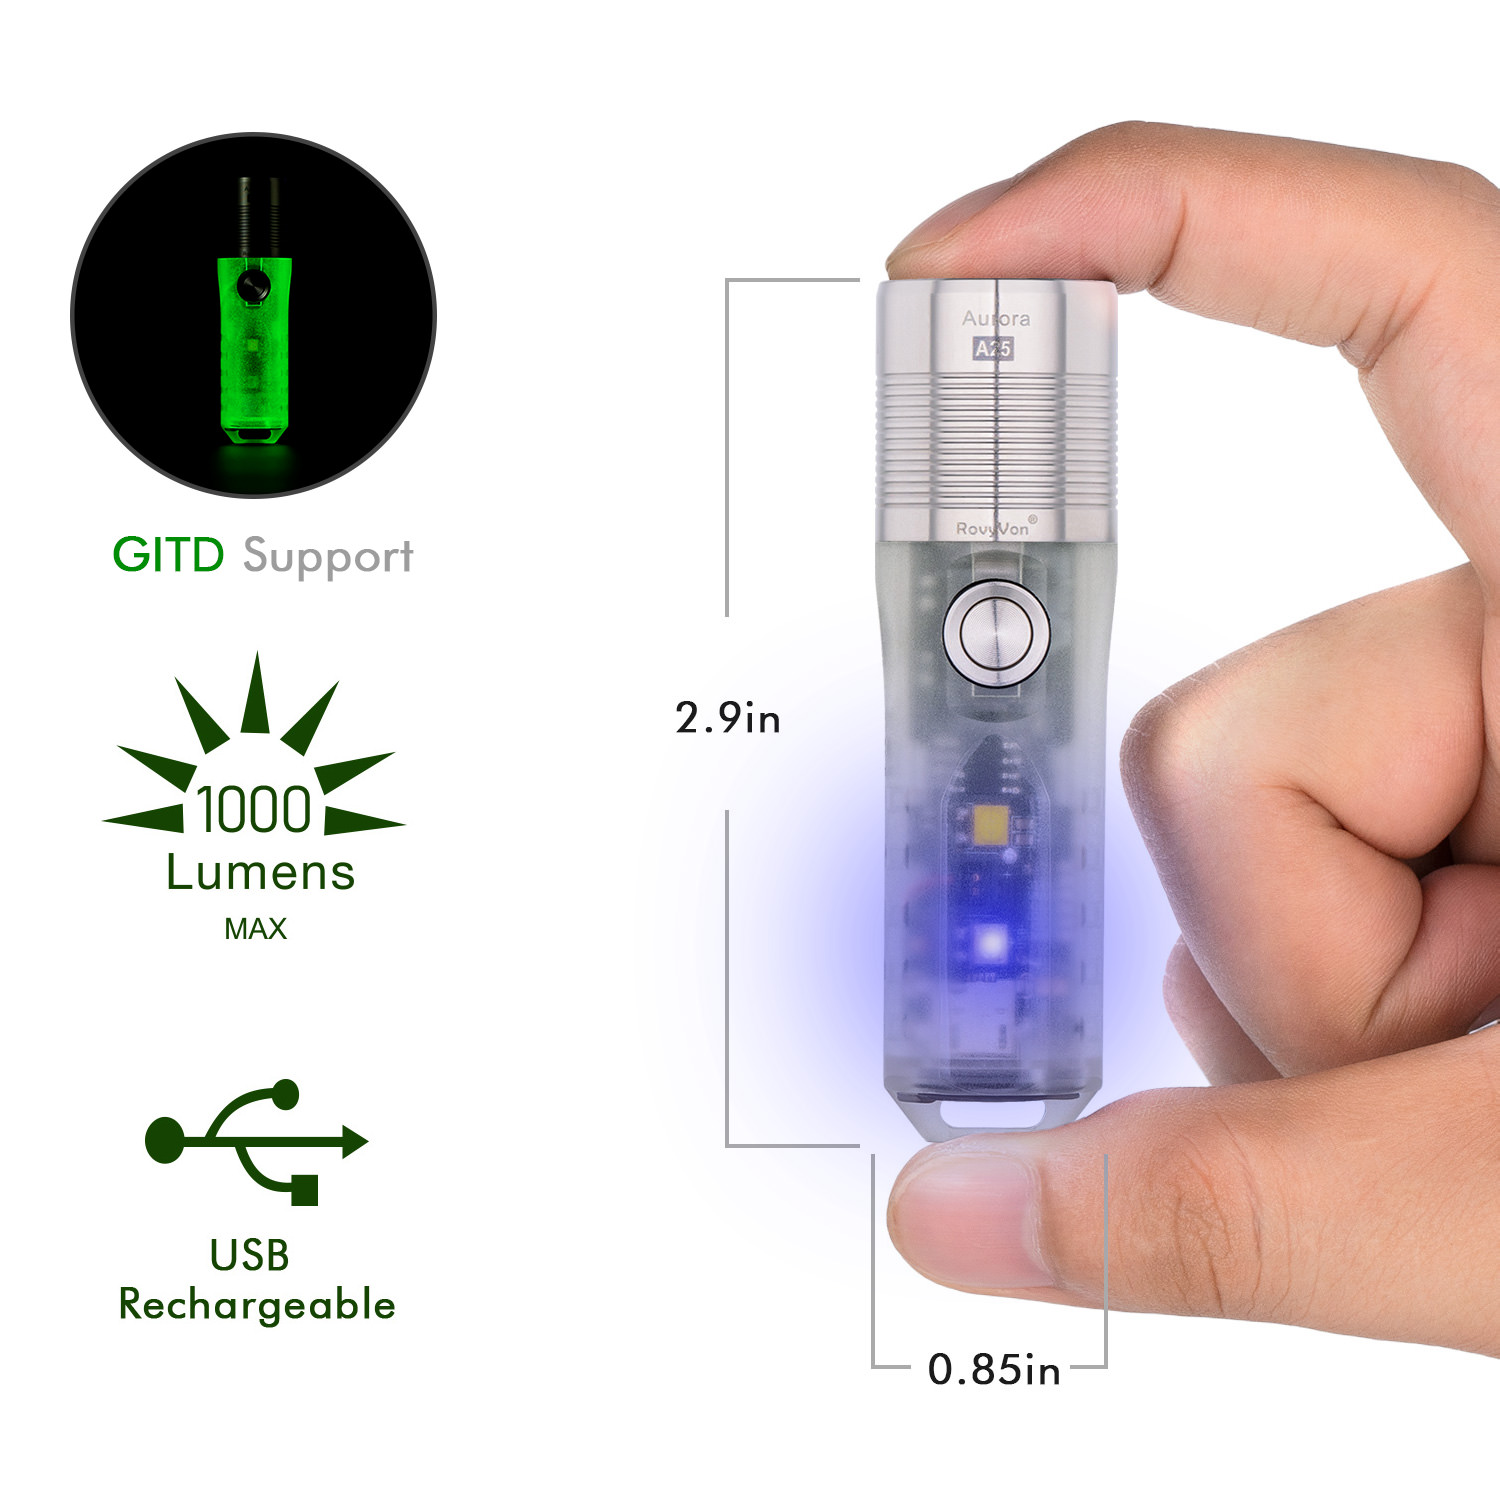  GITD S 2.9in 1000 Lumens MAX o USB Rechargeable 0.85in 